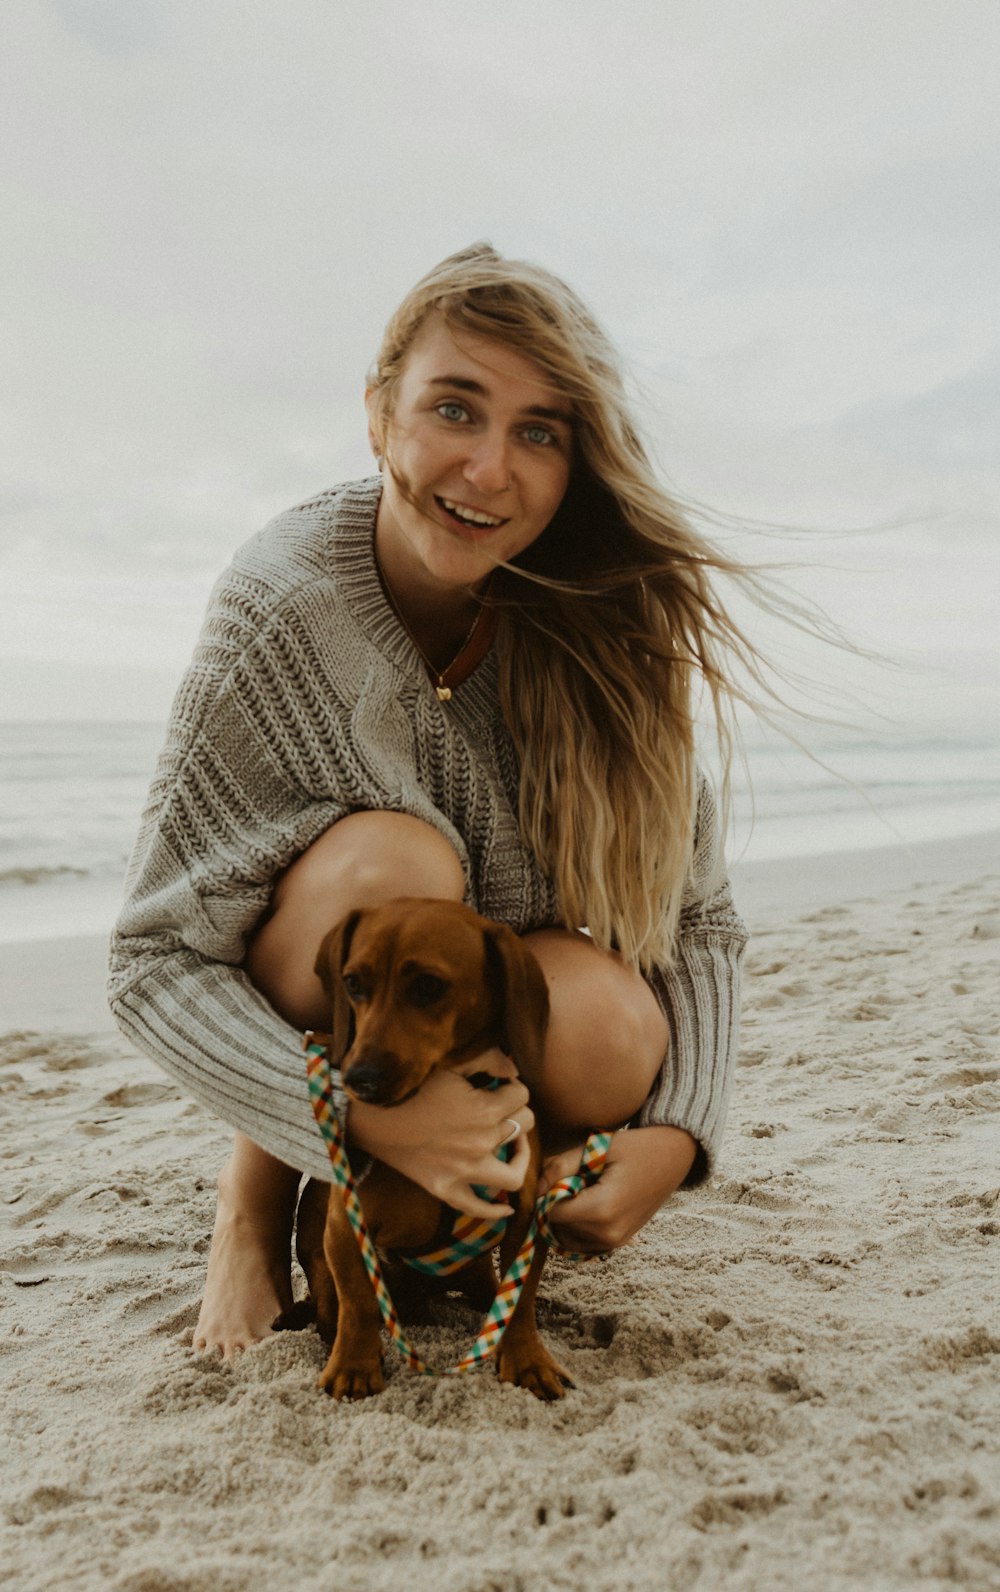 woman in gray knit sweater carrying brown short coated dog on beach during daytime